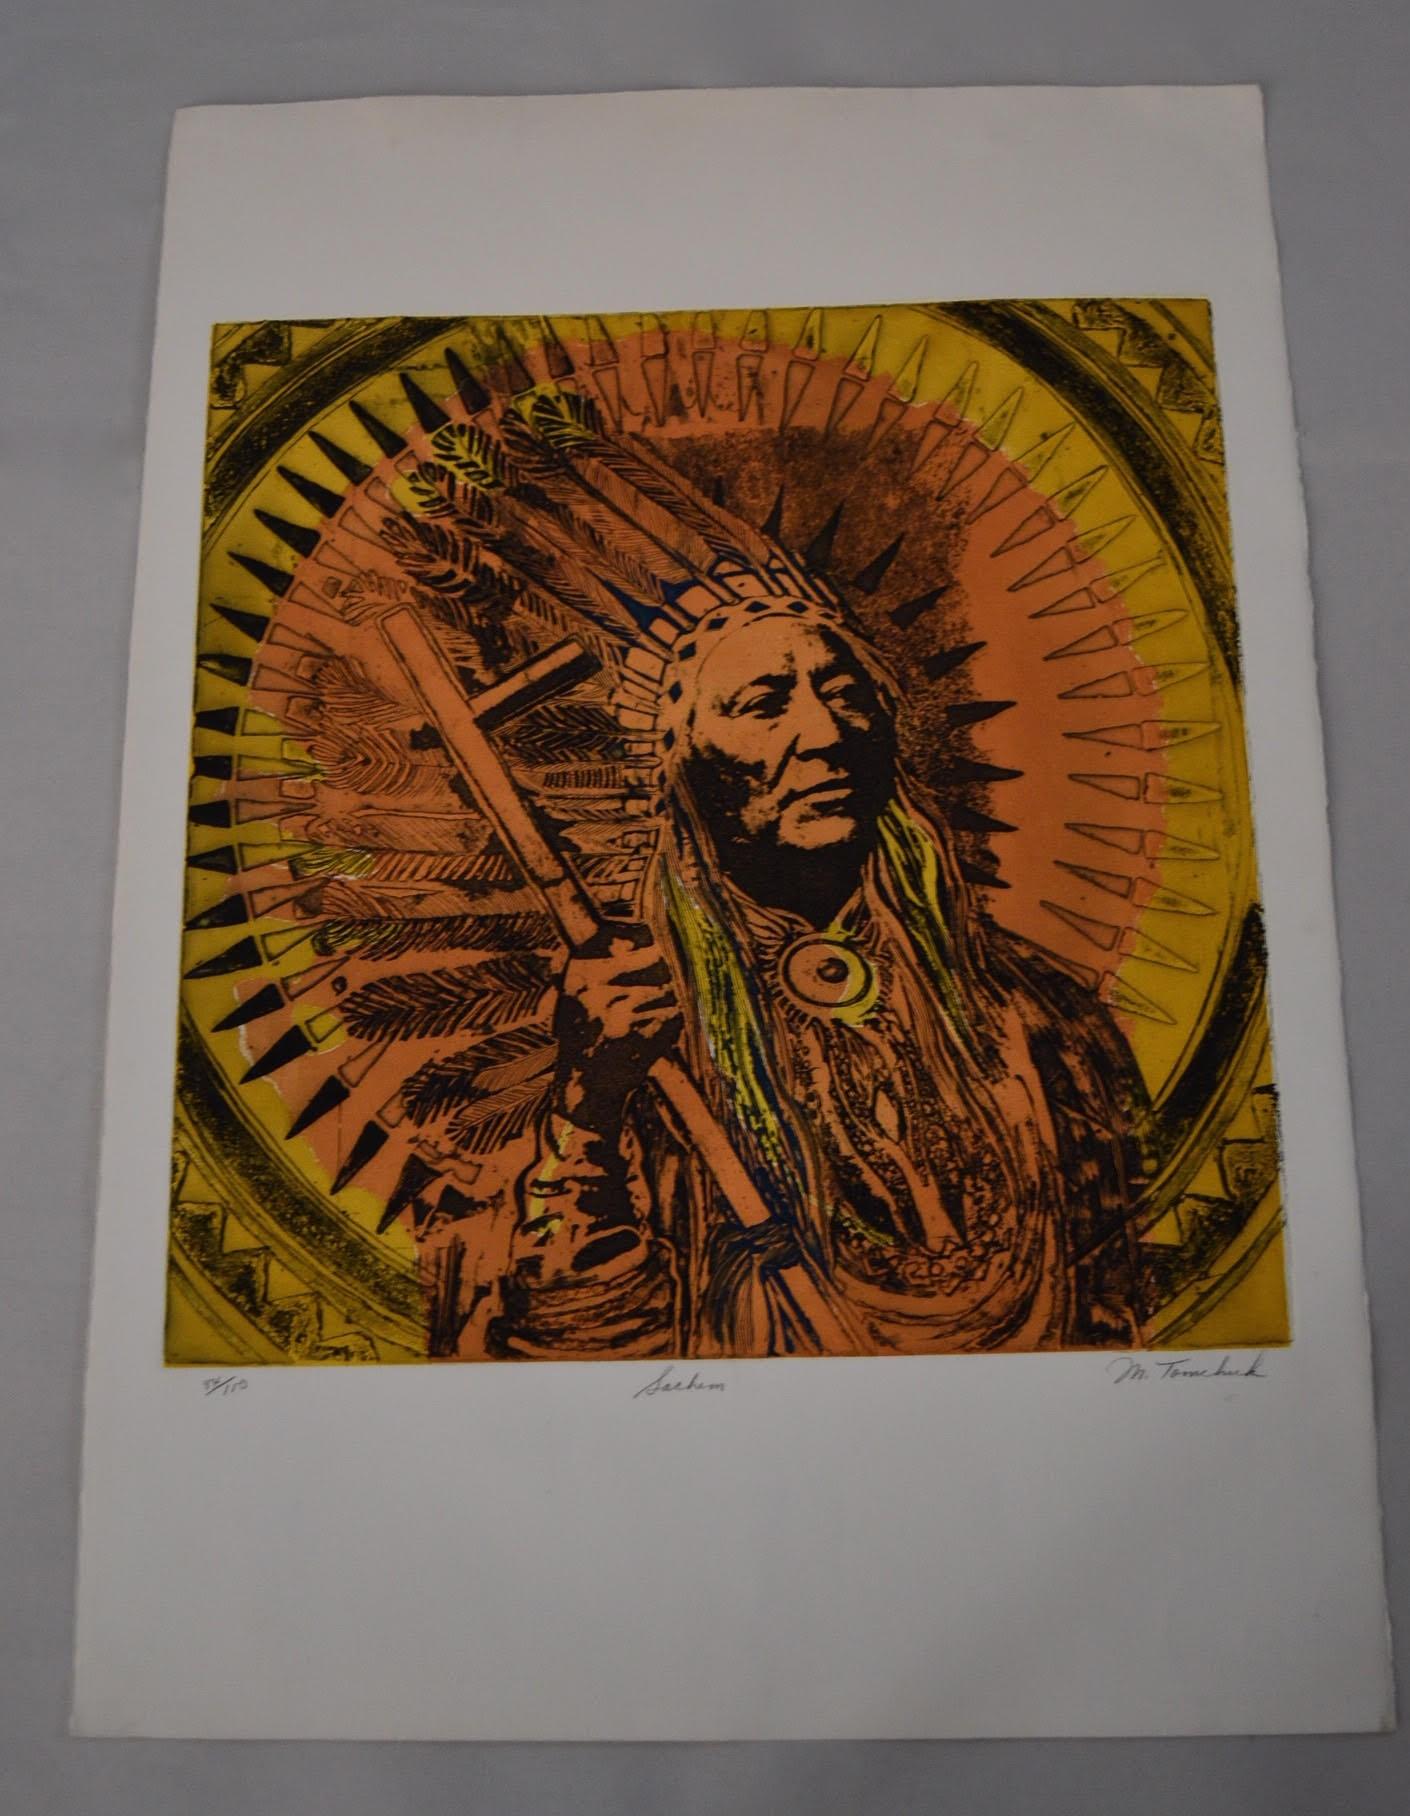 A wonderful and strong print or image by Canadian born artist Marjorie Tomchuk of a Native American chief. 

The print is pencil signed, titled (Sachem), and numbered (84/100) by the artist.

Clearly an eye-catching work. 

Per the artist's